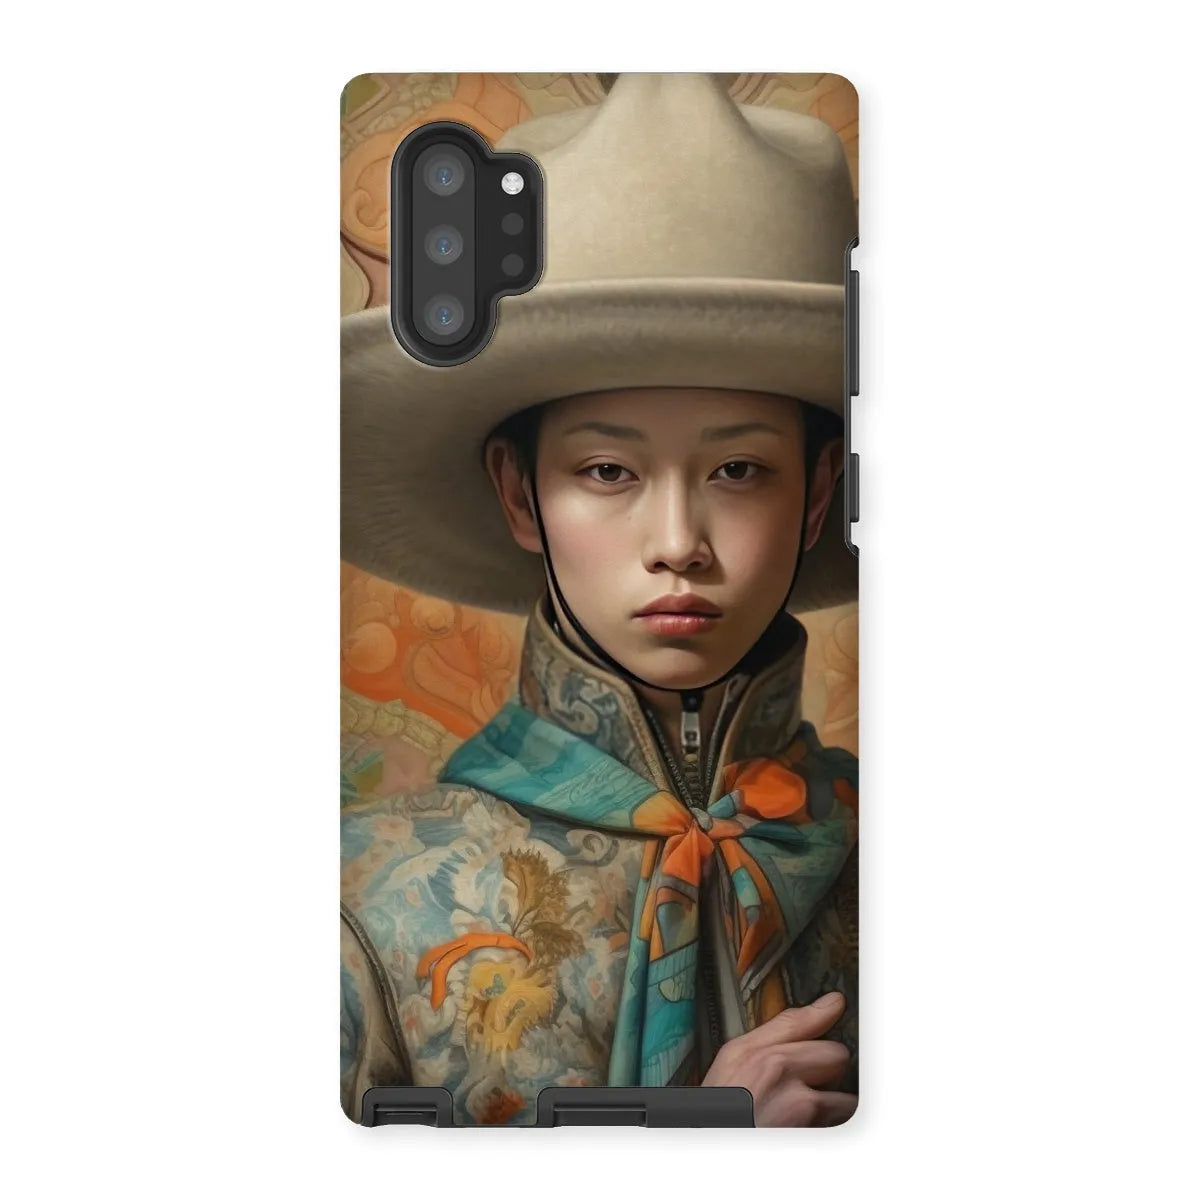 Xiang - Gaysian Chinese Cowboy Aesthetic Art Phone Case - Samsung Galaxy Note 10p / Matte - Mobile Phone Cases